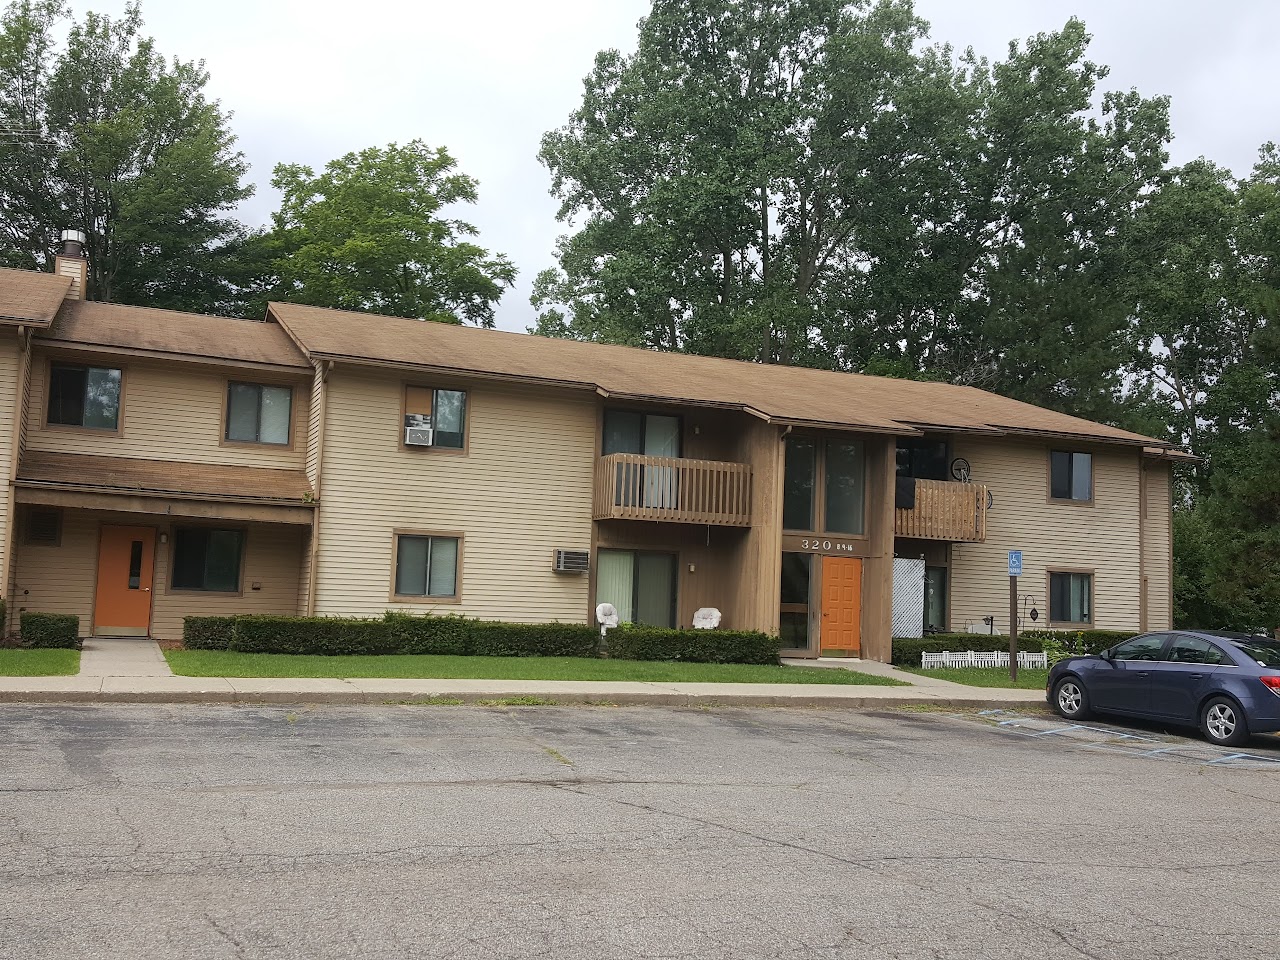 Photo of WHITEHILLS APTS II. Affordable housing located at 322 ALGER ST HOWELL, MI 48843